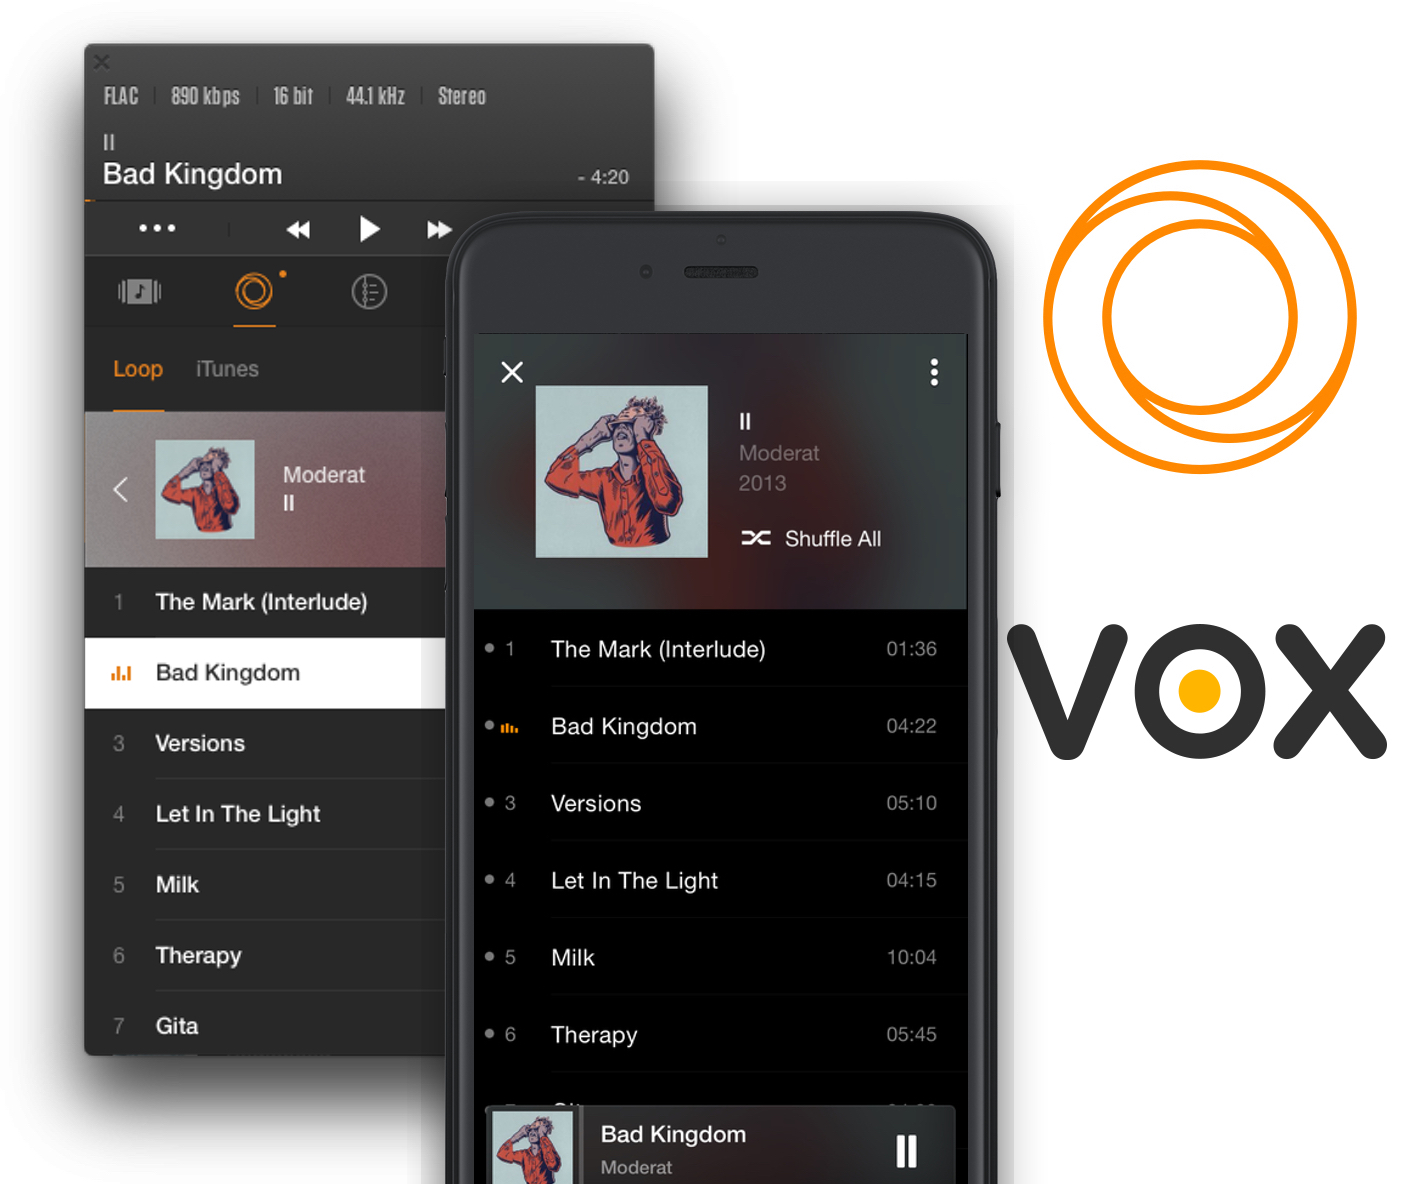 turn-youtube-video-into-mp3-vox